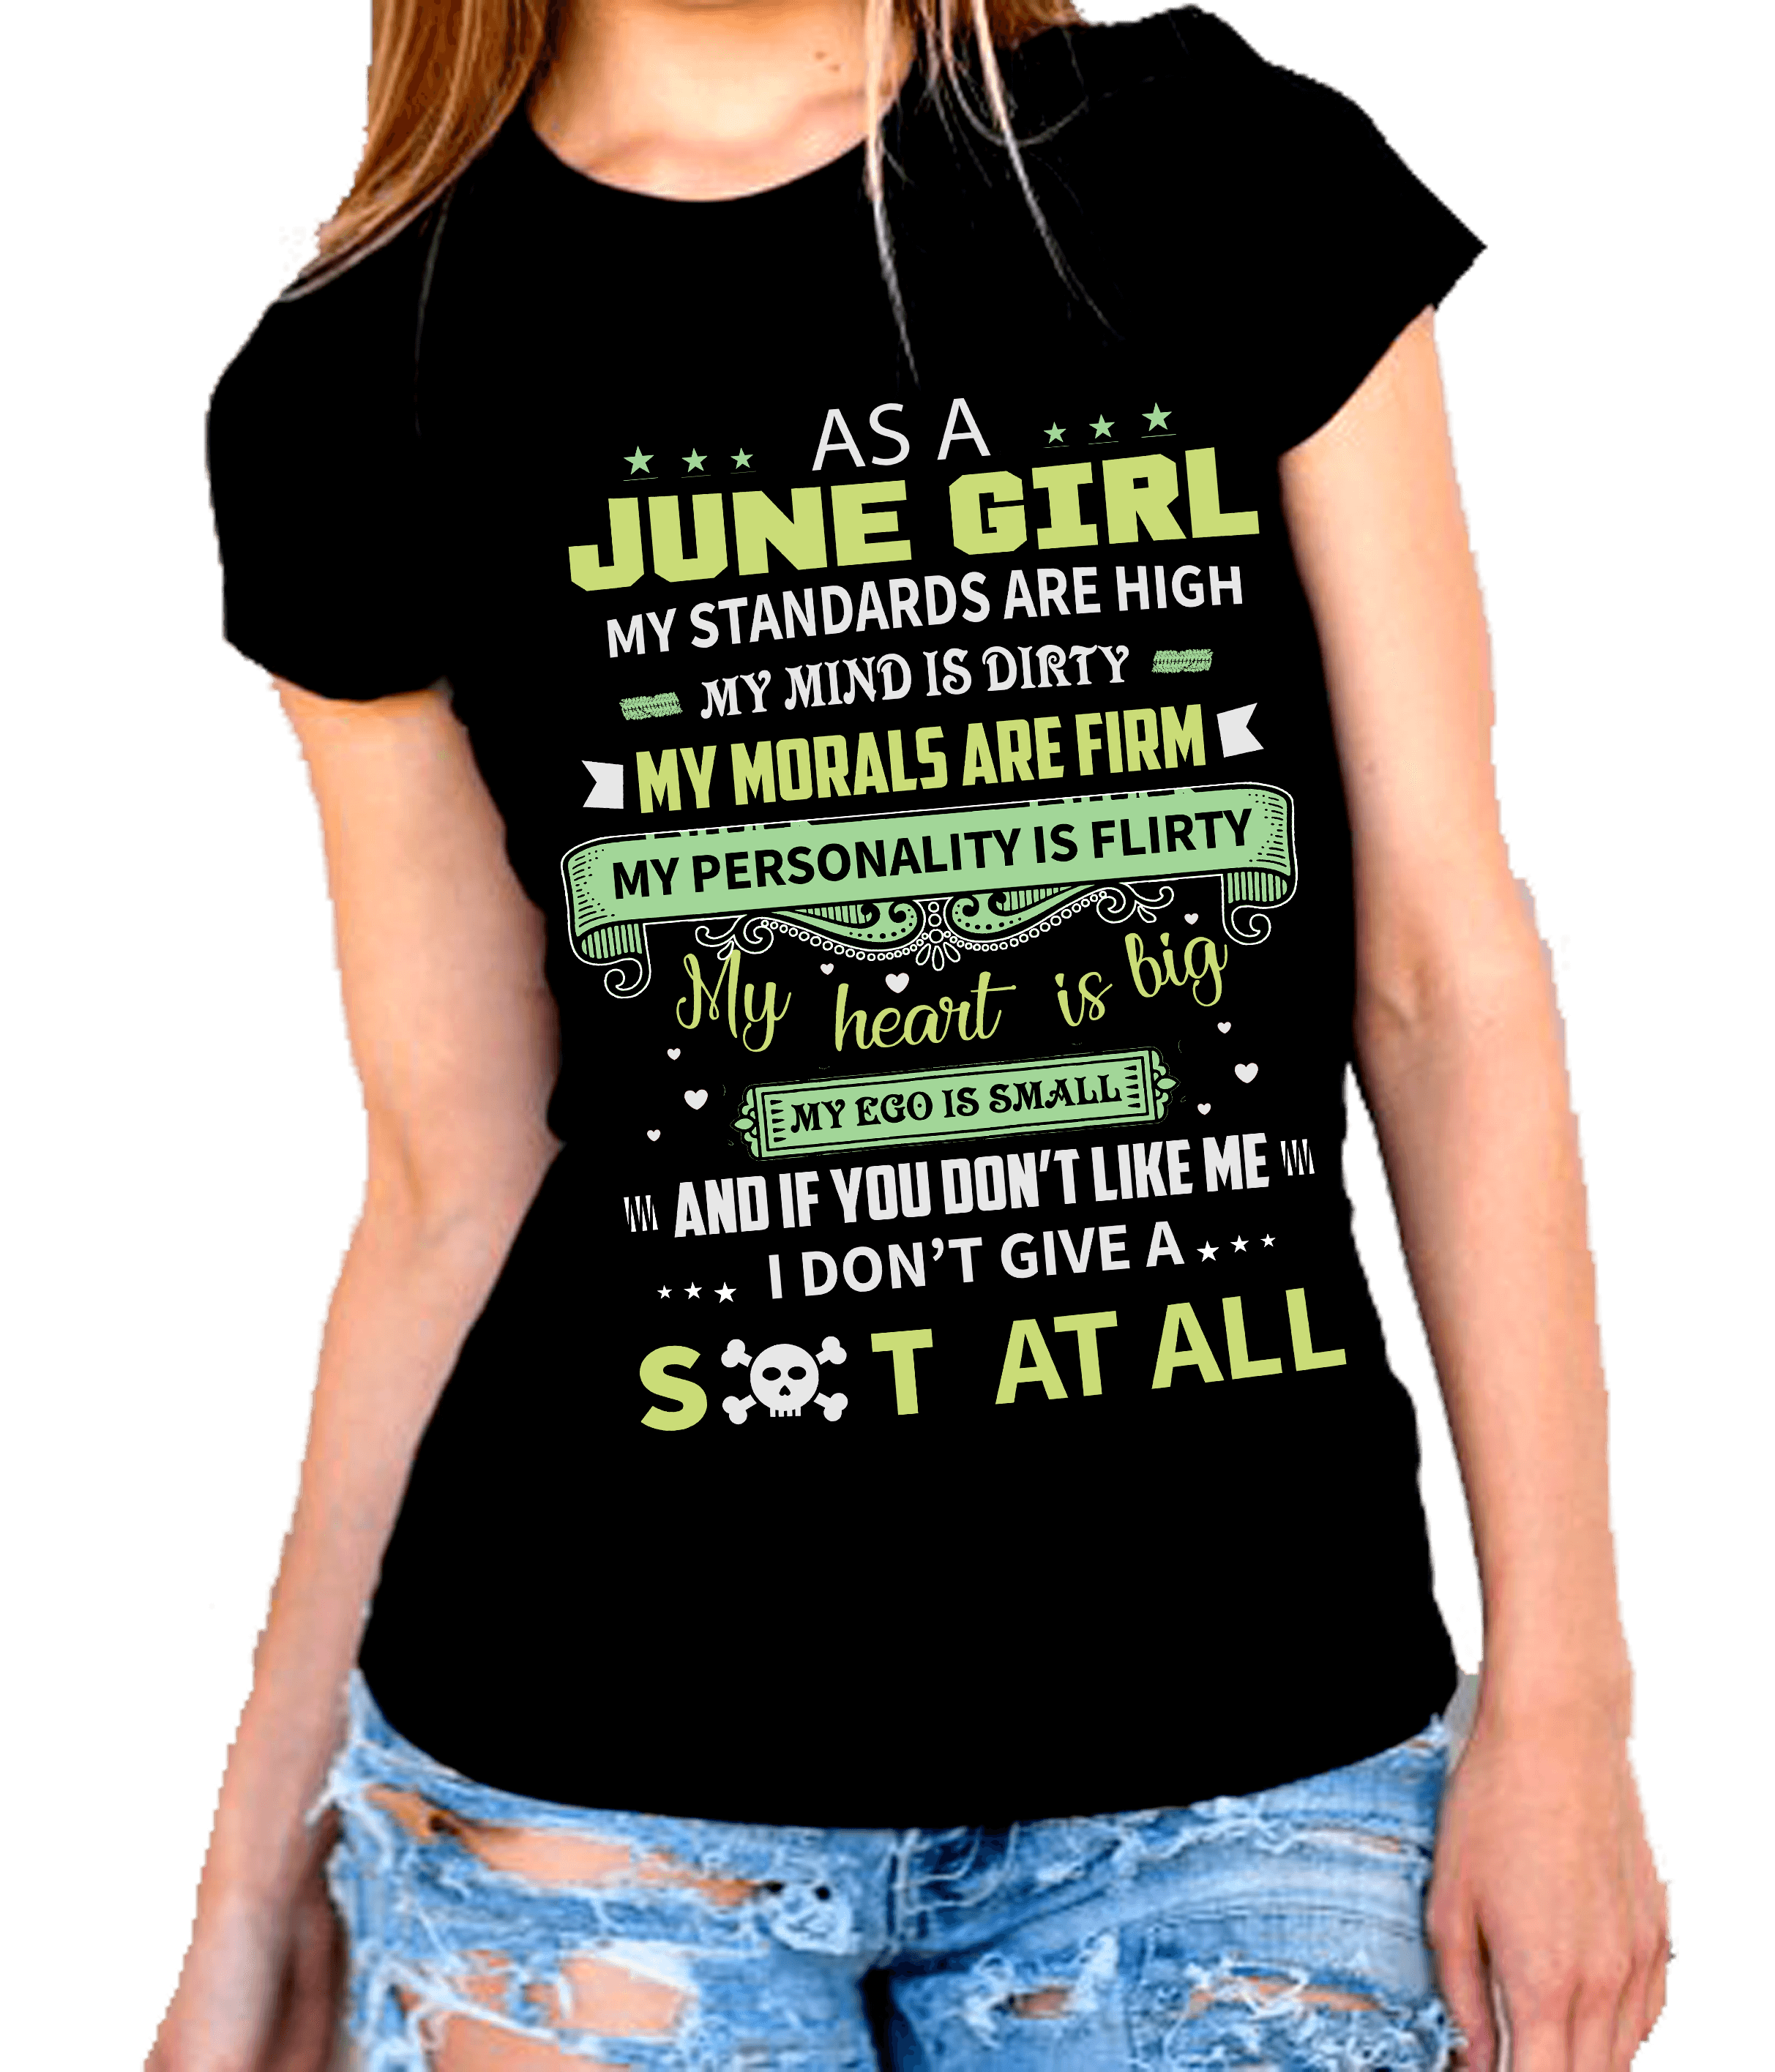 "June Pack Of 3 Shirts"